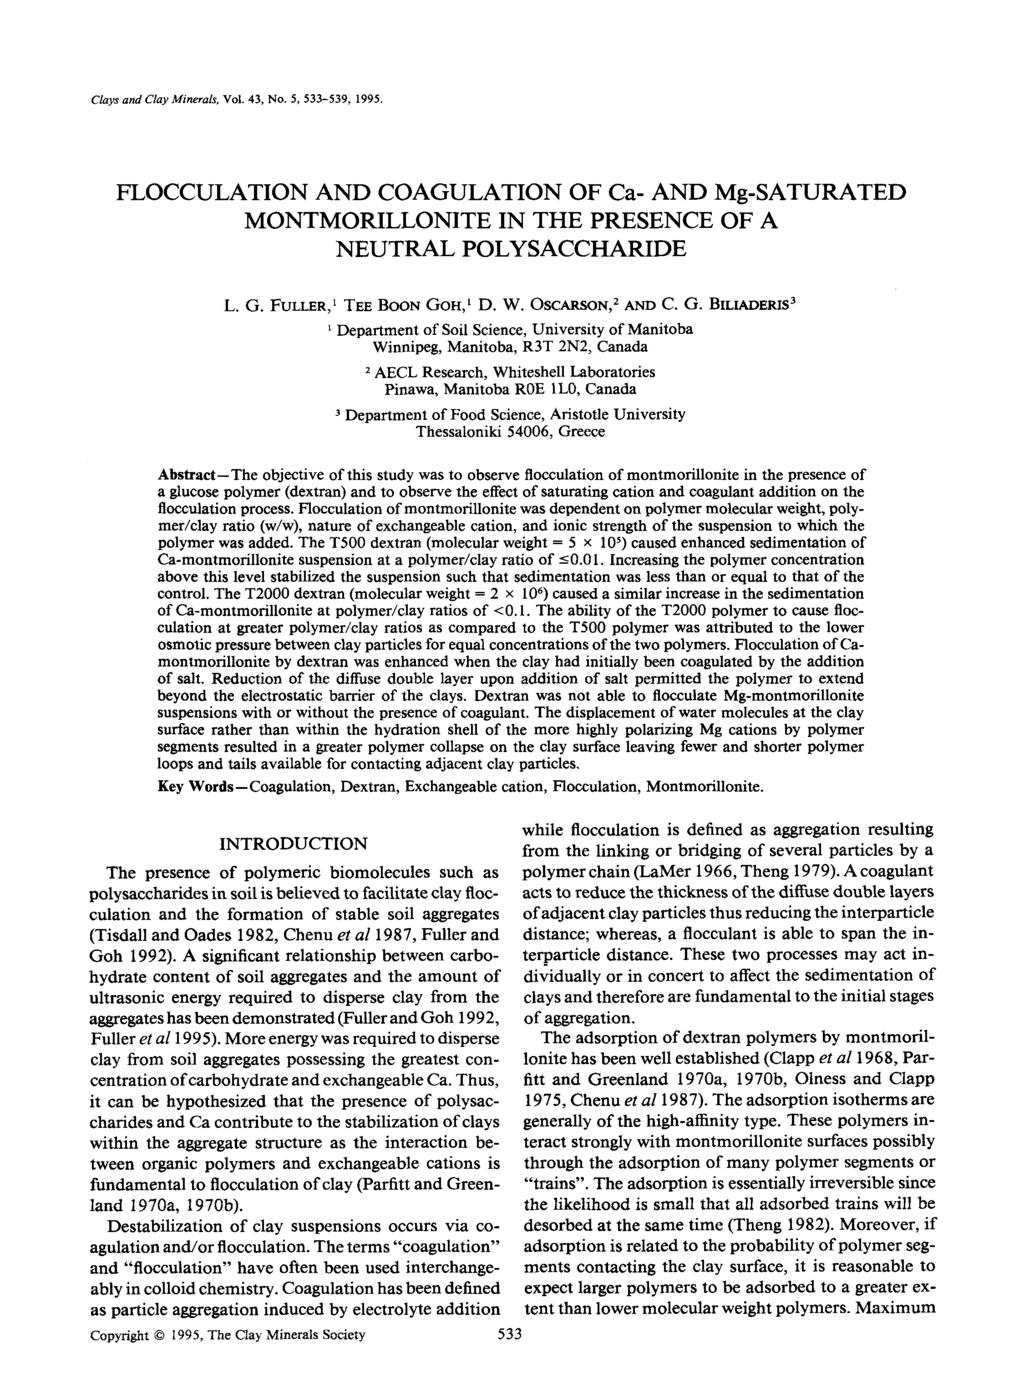 Clays and Clay Minerals, Vol. 43, No. 5, 533-539, 1995. FLCCULATIN AND CAGULATIN F Ca- AND Mg-SATURATED MNTMRILLNITE IN THE PRESENCE F A NEUTRAL PLYSACCHARIDE L. G. FULLER, t TEE BN GH, t D. W.